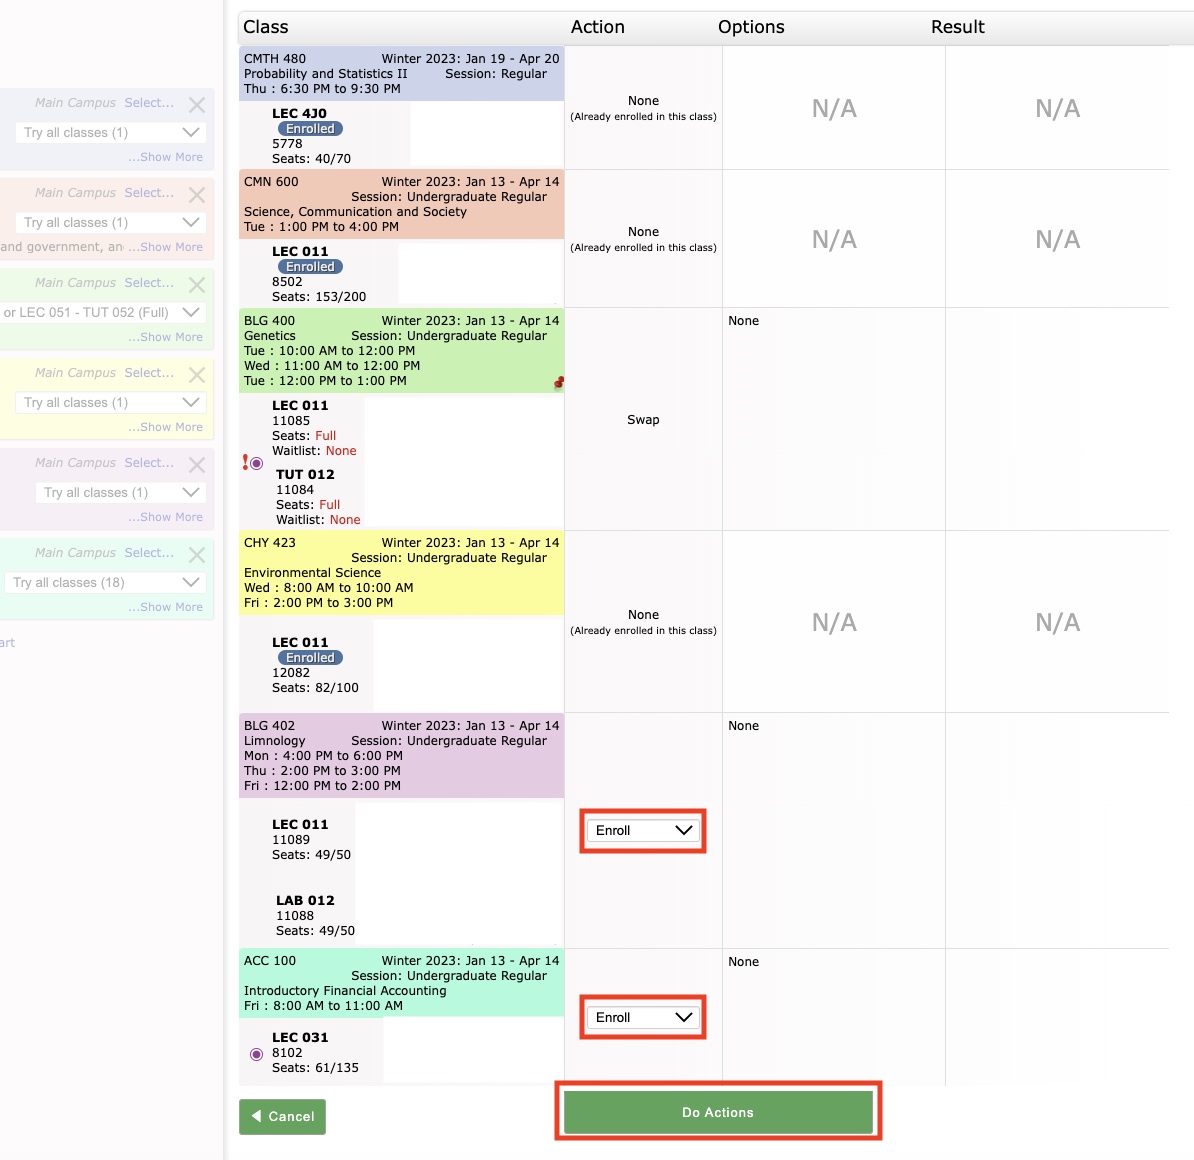 The Visual Schedule Builder with all selected courses listed. Beside each course is a drop-down menu, all set to the 'Enroll' option. The 'Do Actions' button underneath all list items is highlighted.